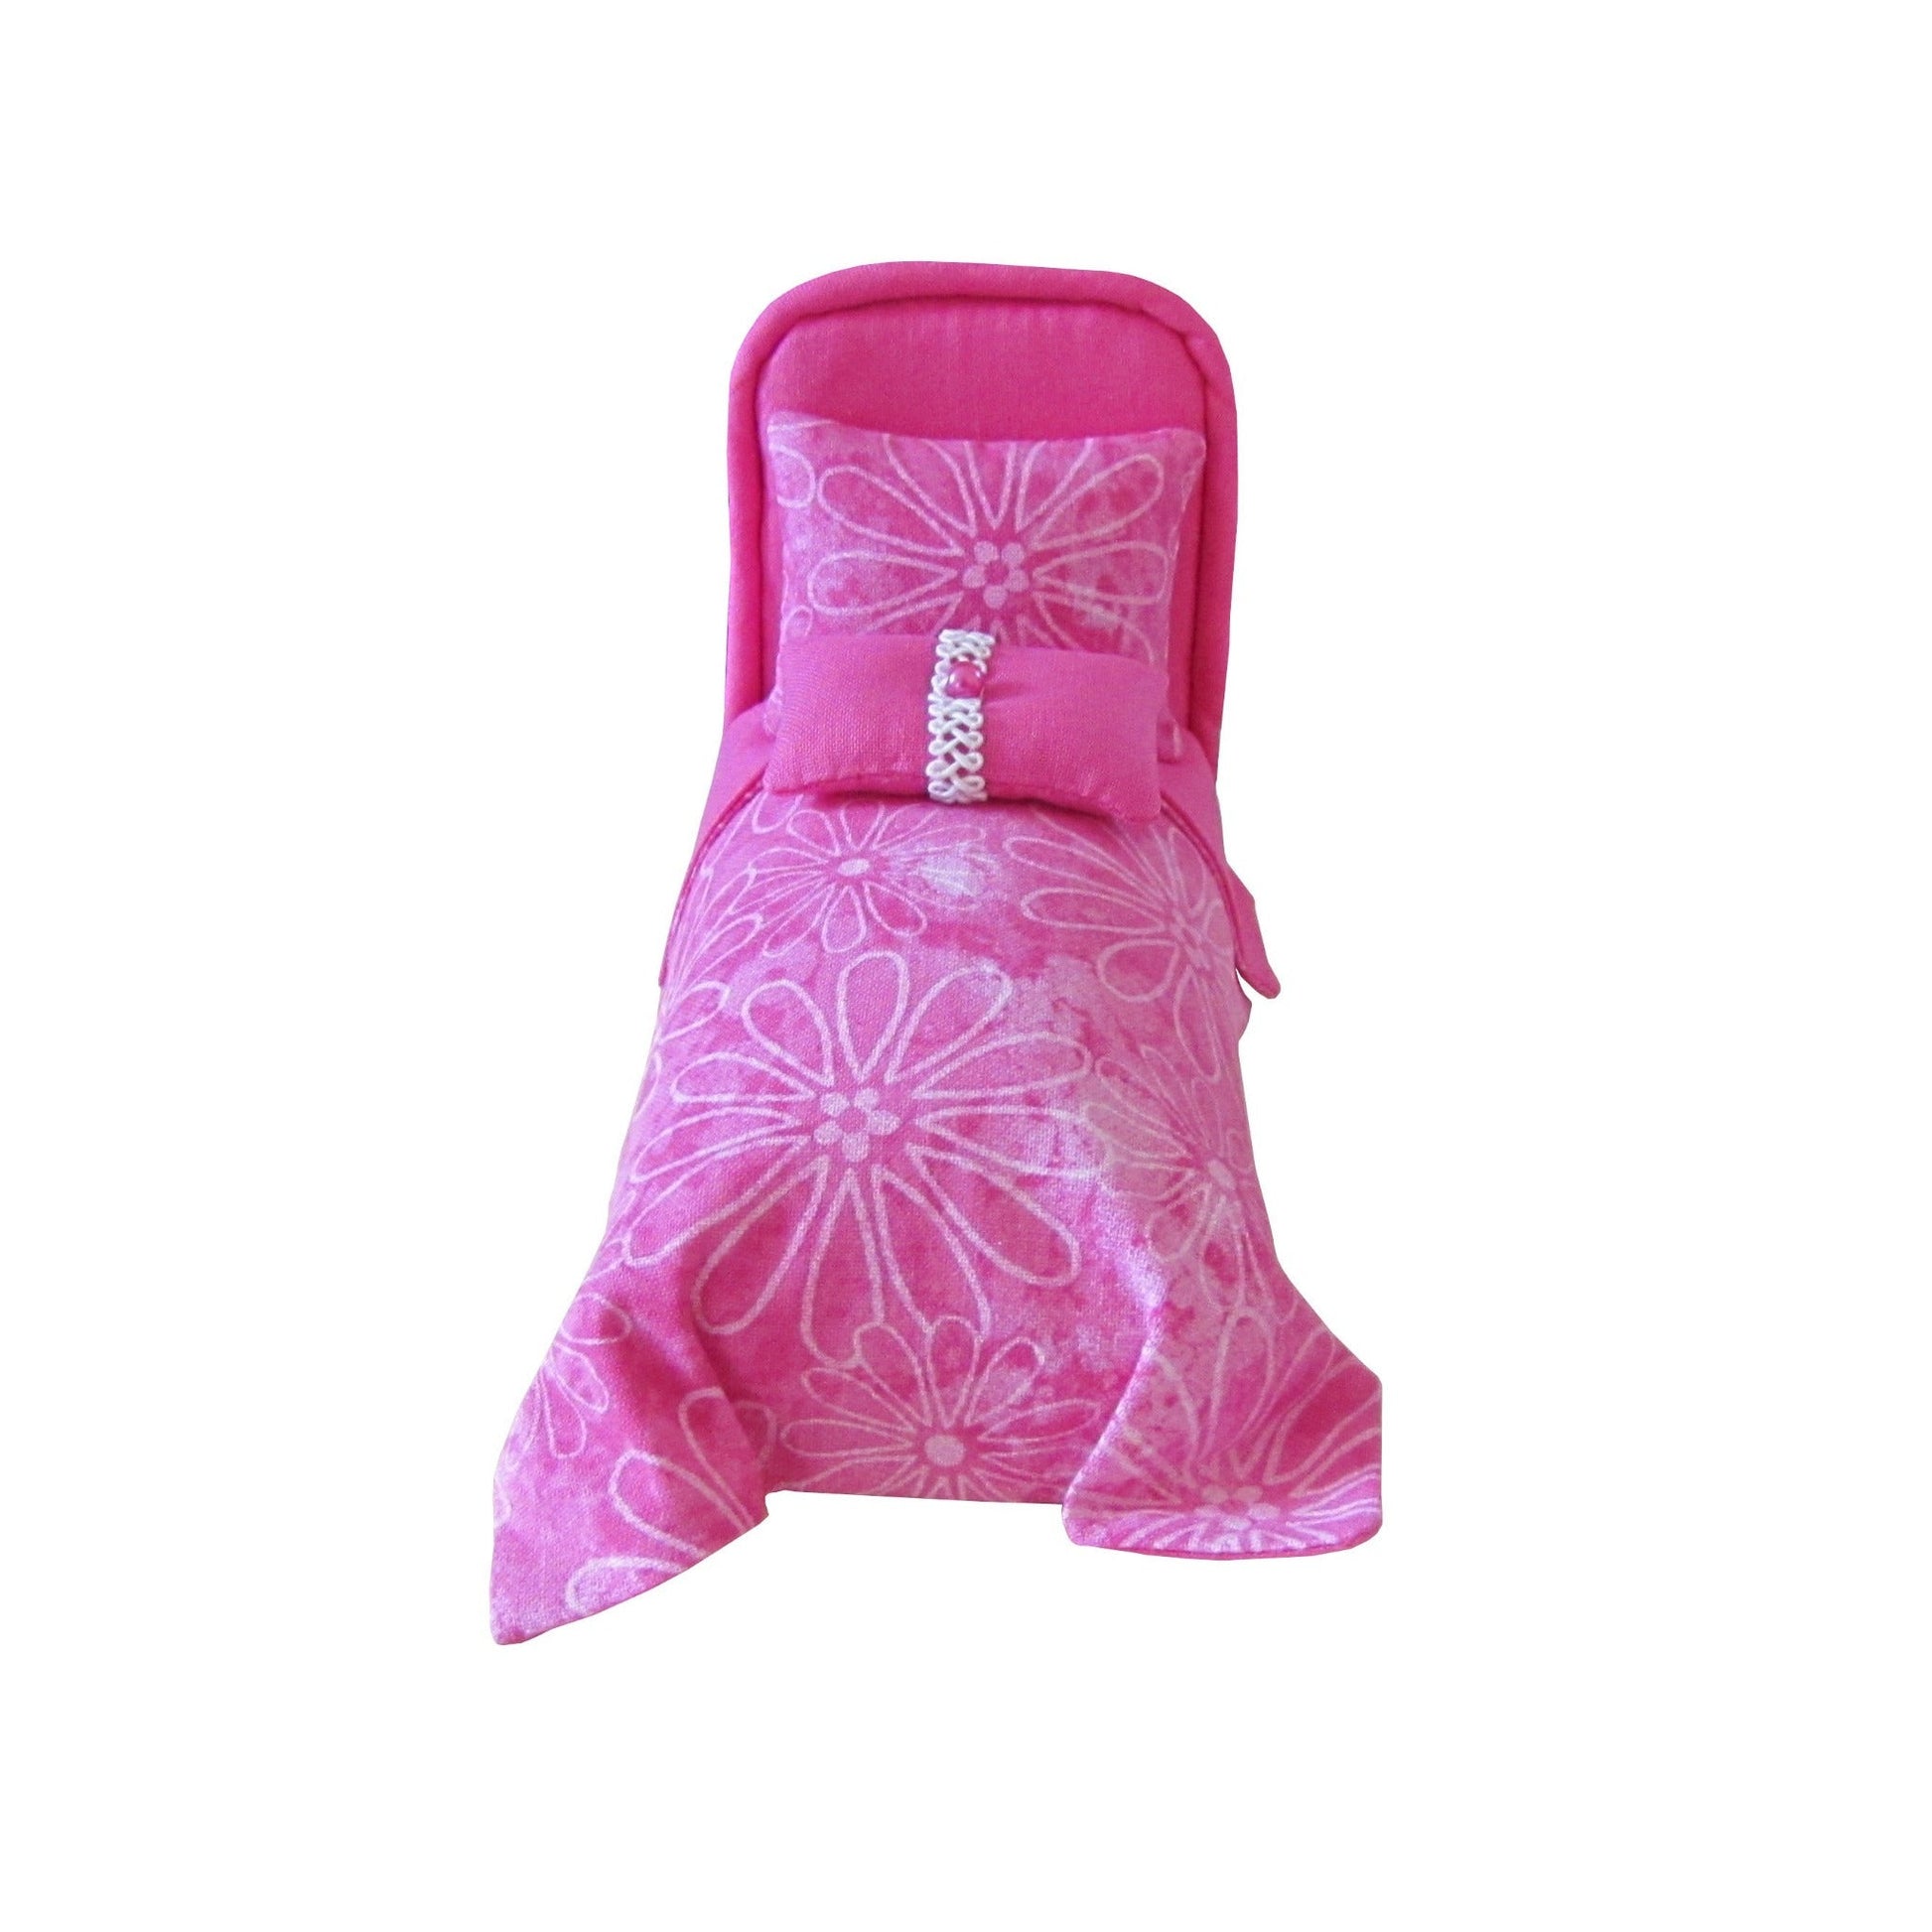 Pink Pincushion Bed with Floral Bedding Front view